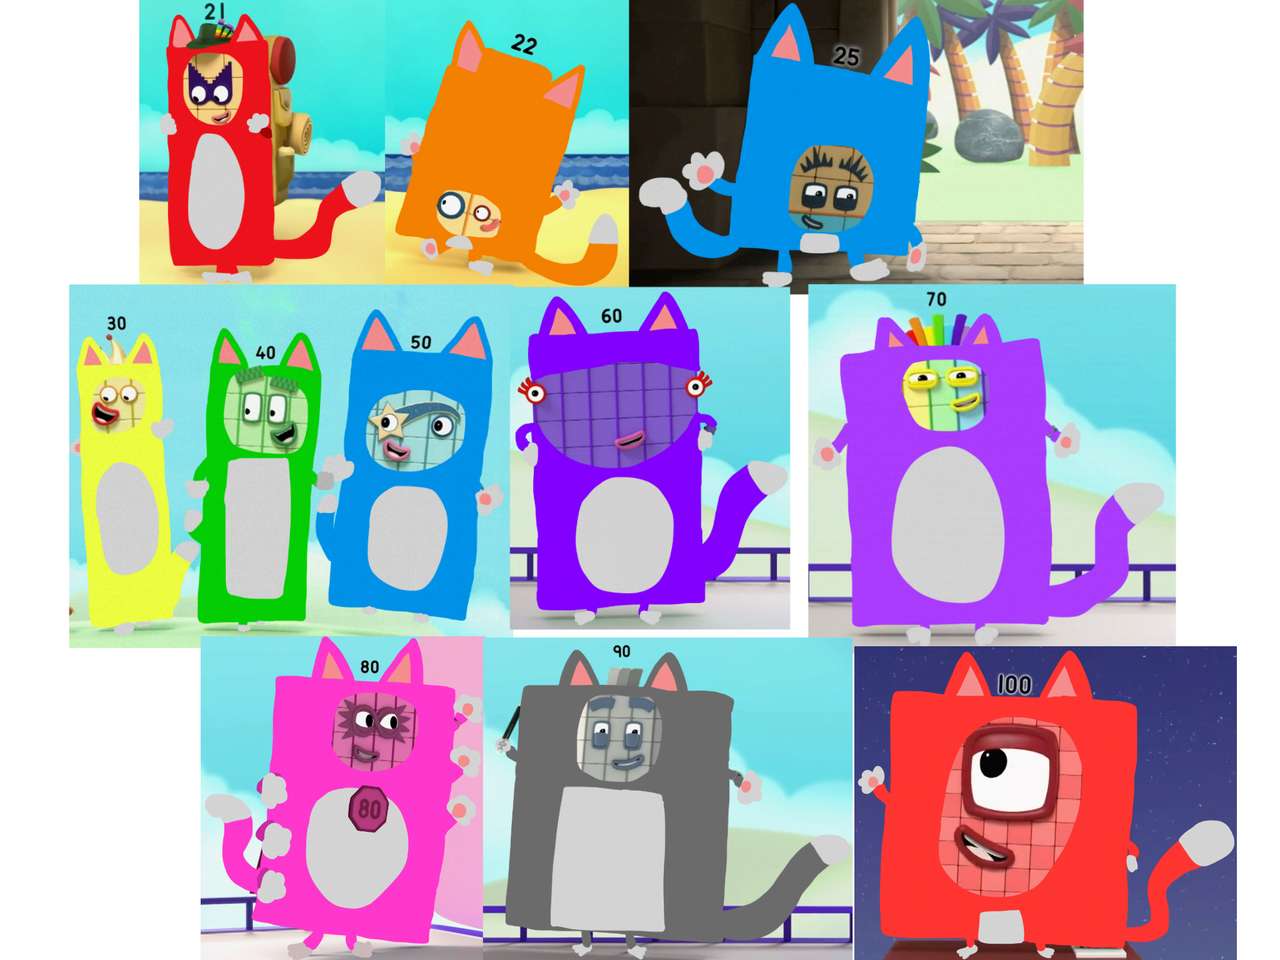 NumberBlocks 21,22,25,30,80,50,60,70,80,90,100 puzzle online from photo